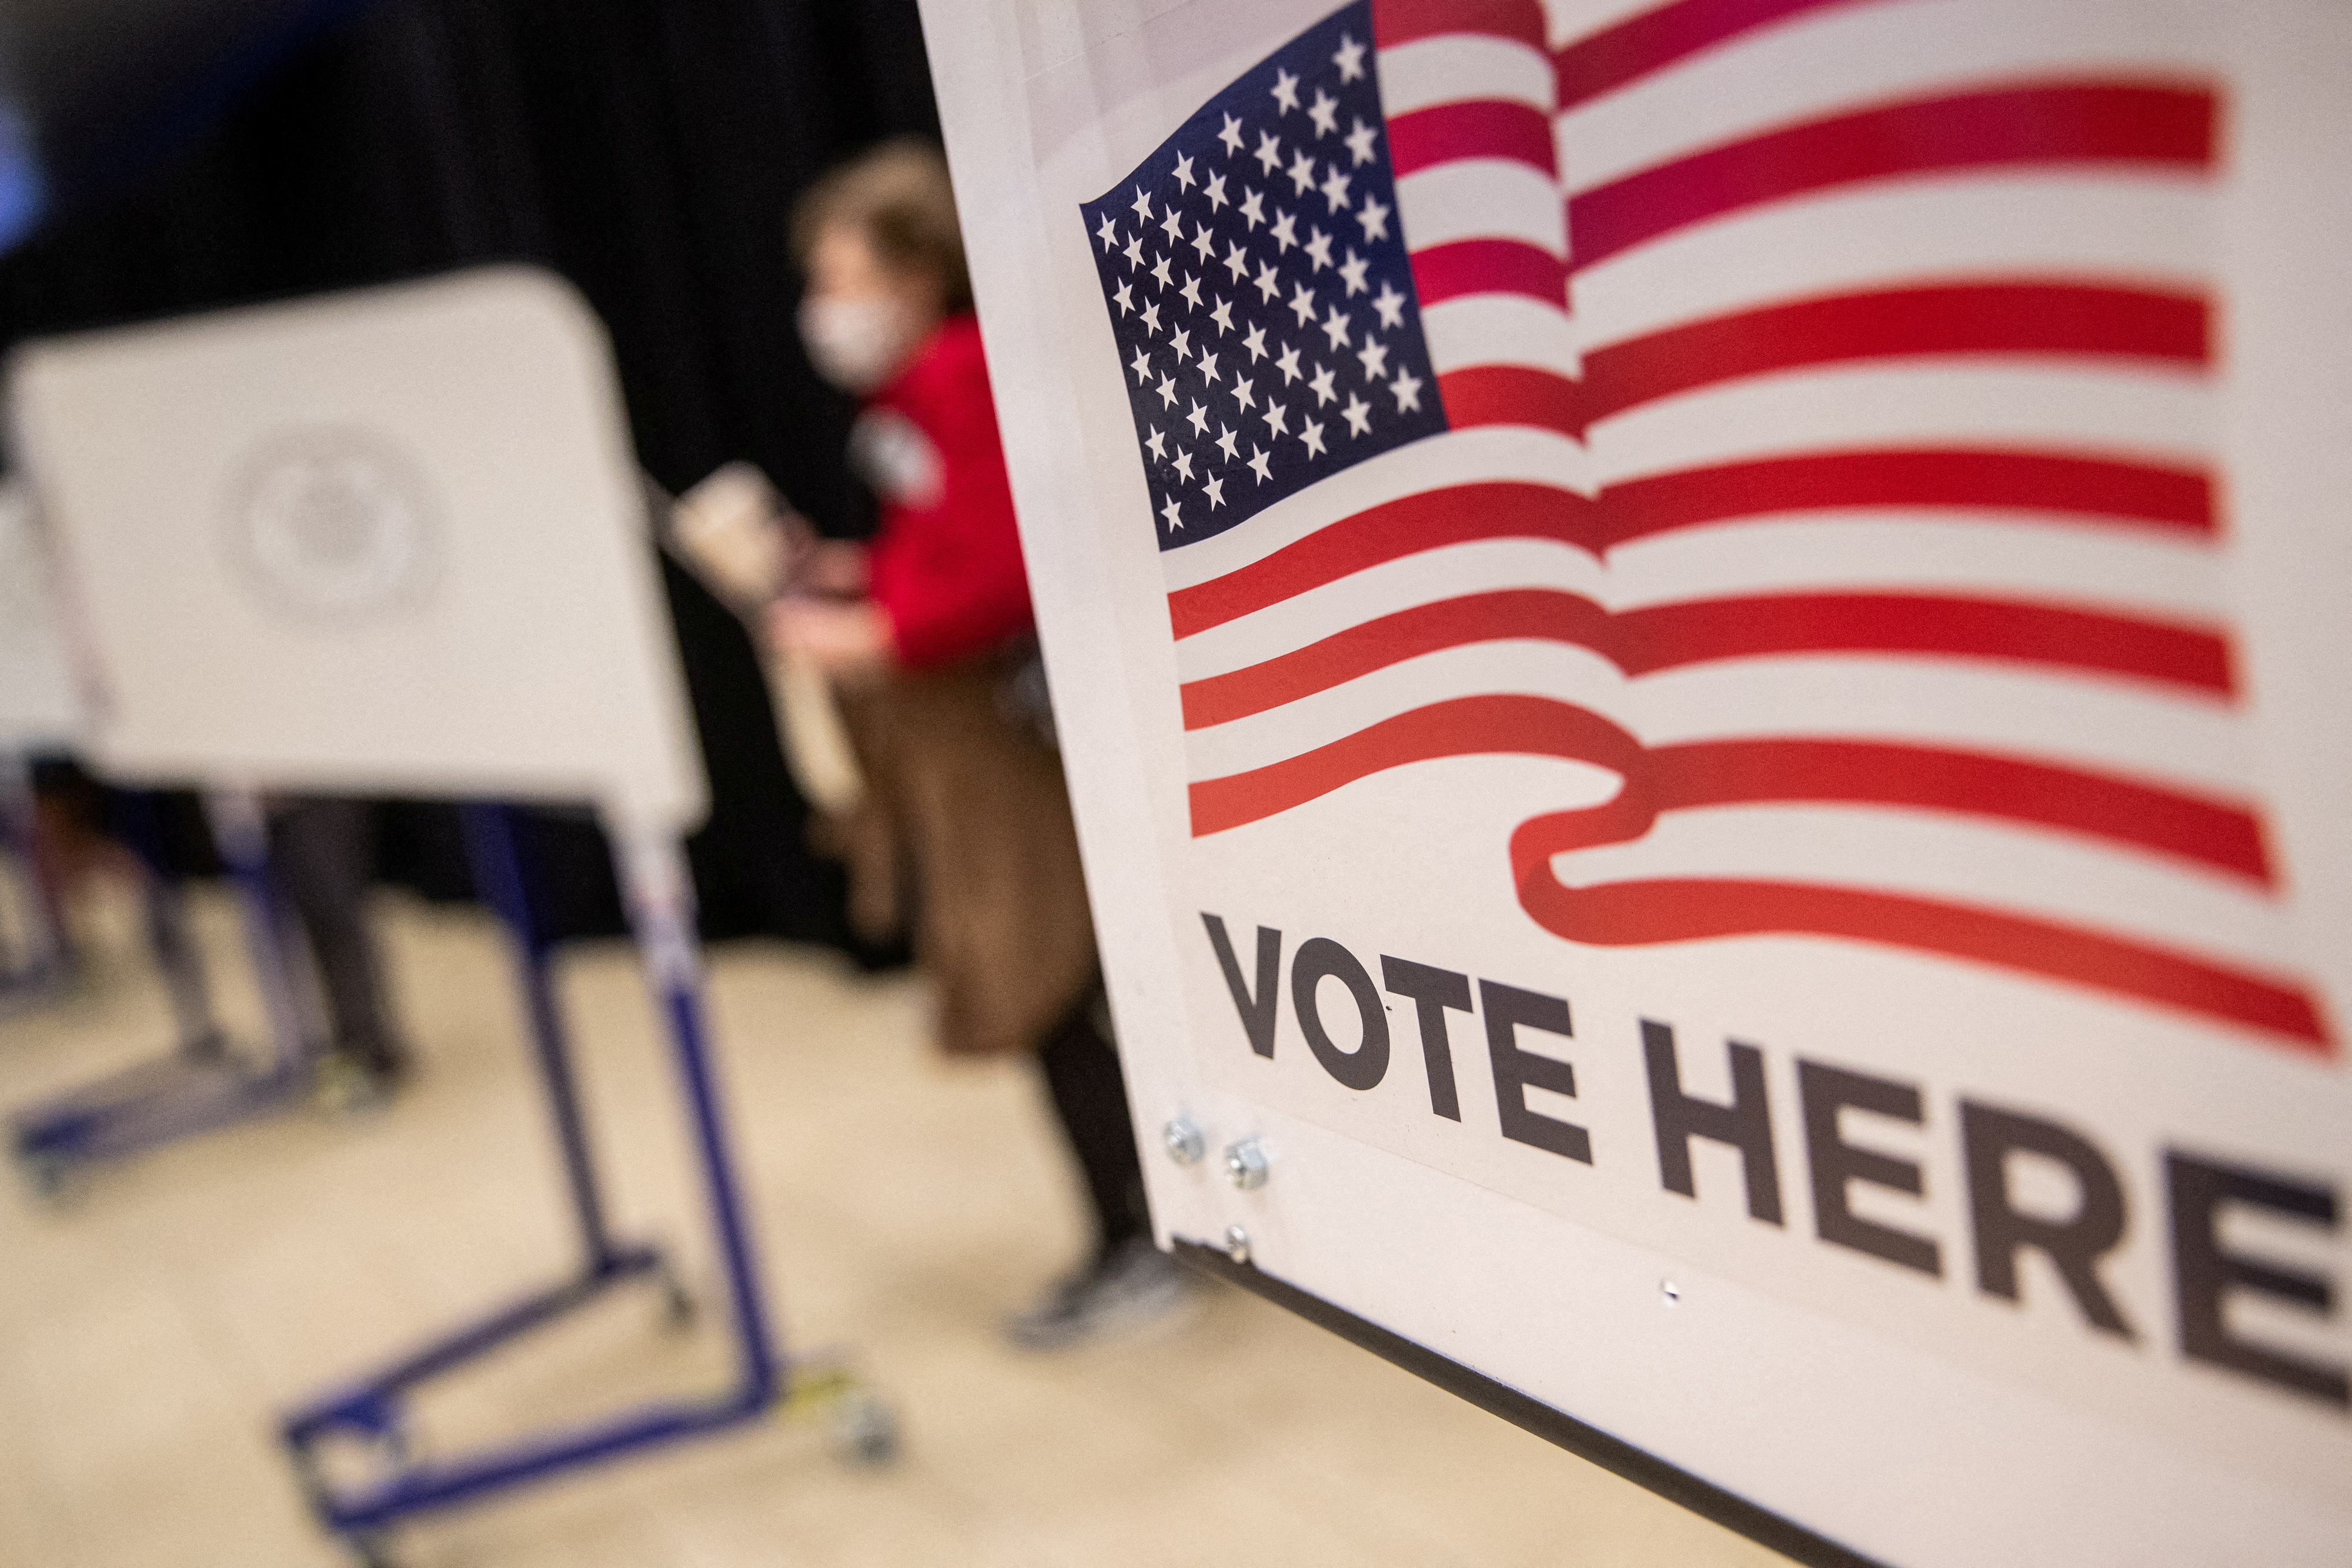 An American flag sign is seen on a voting booth at Madison Square Garden in Manhattan